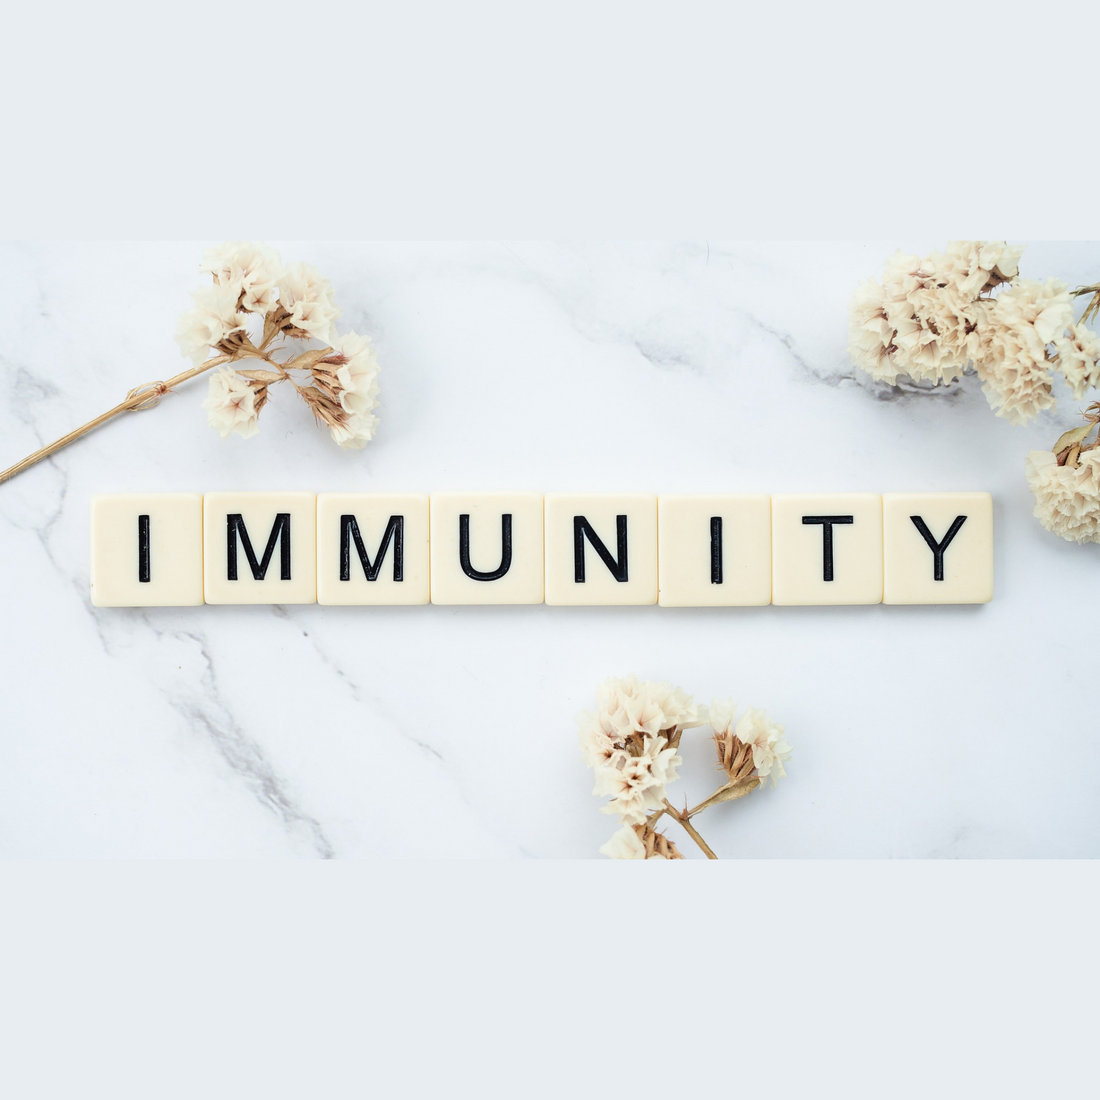 Hacks to Keep Your Immunity Up